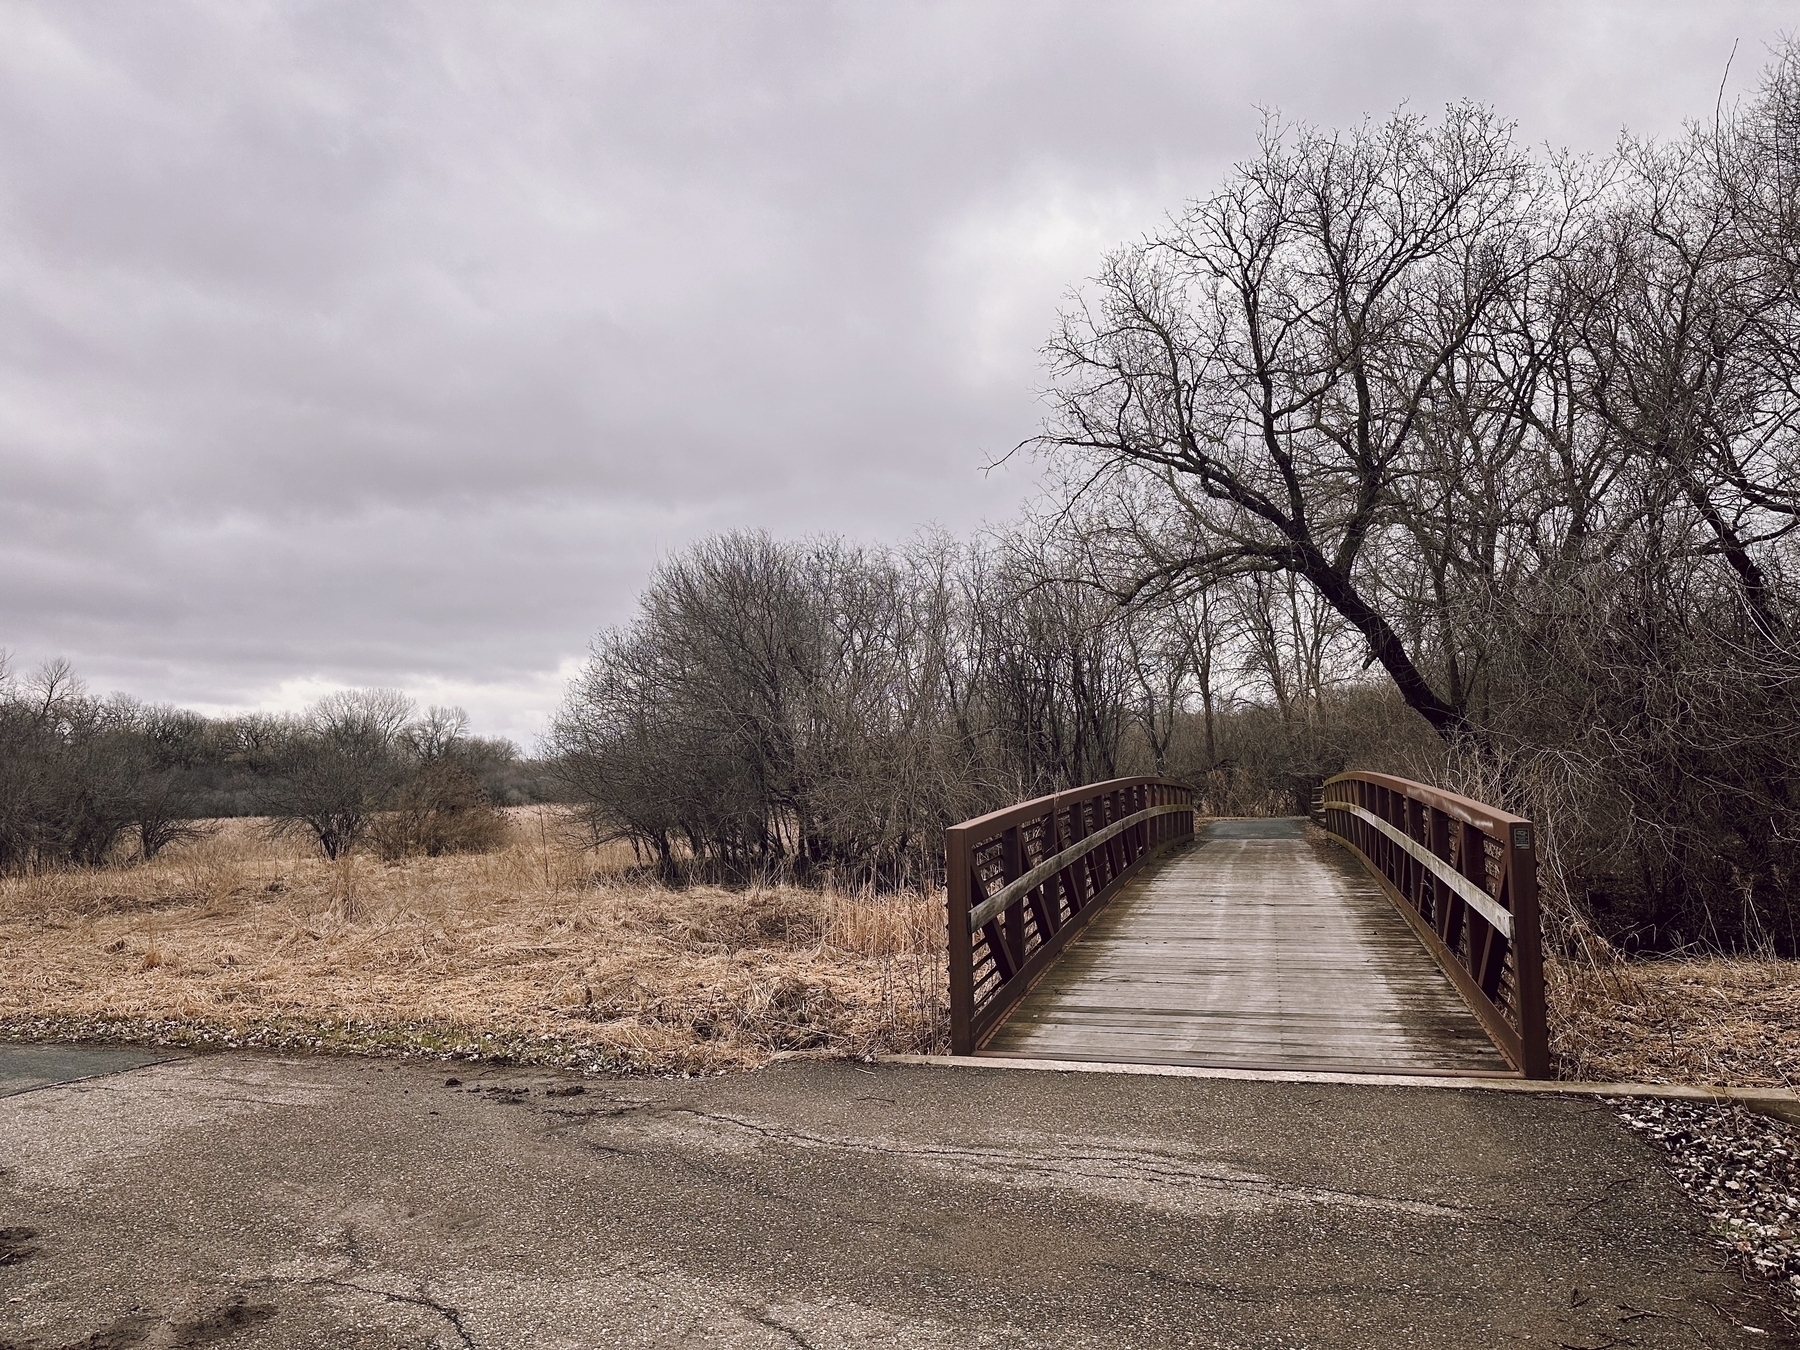 A wooden footbridge extends over a grassy area, leading into a winter-bare woodland under an overcast sky.